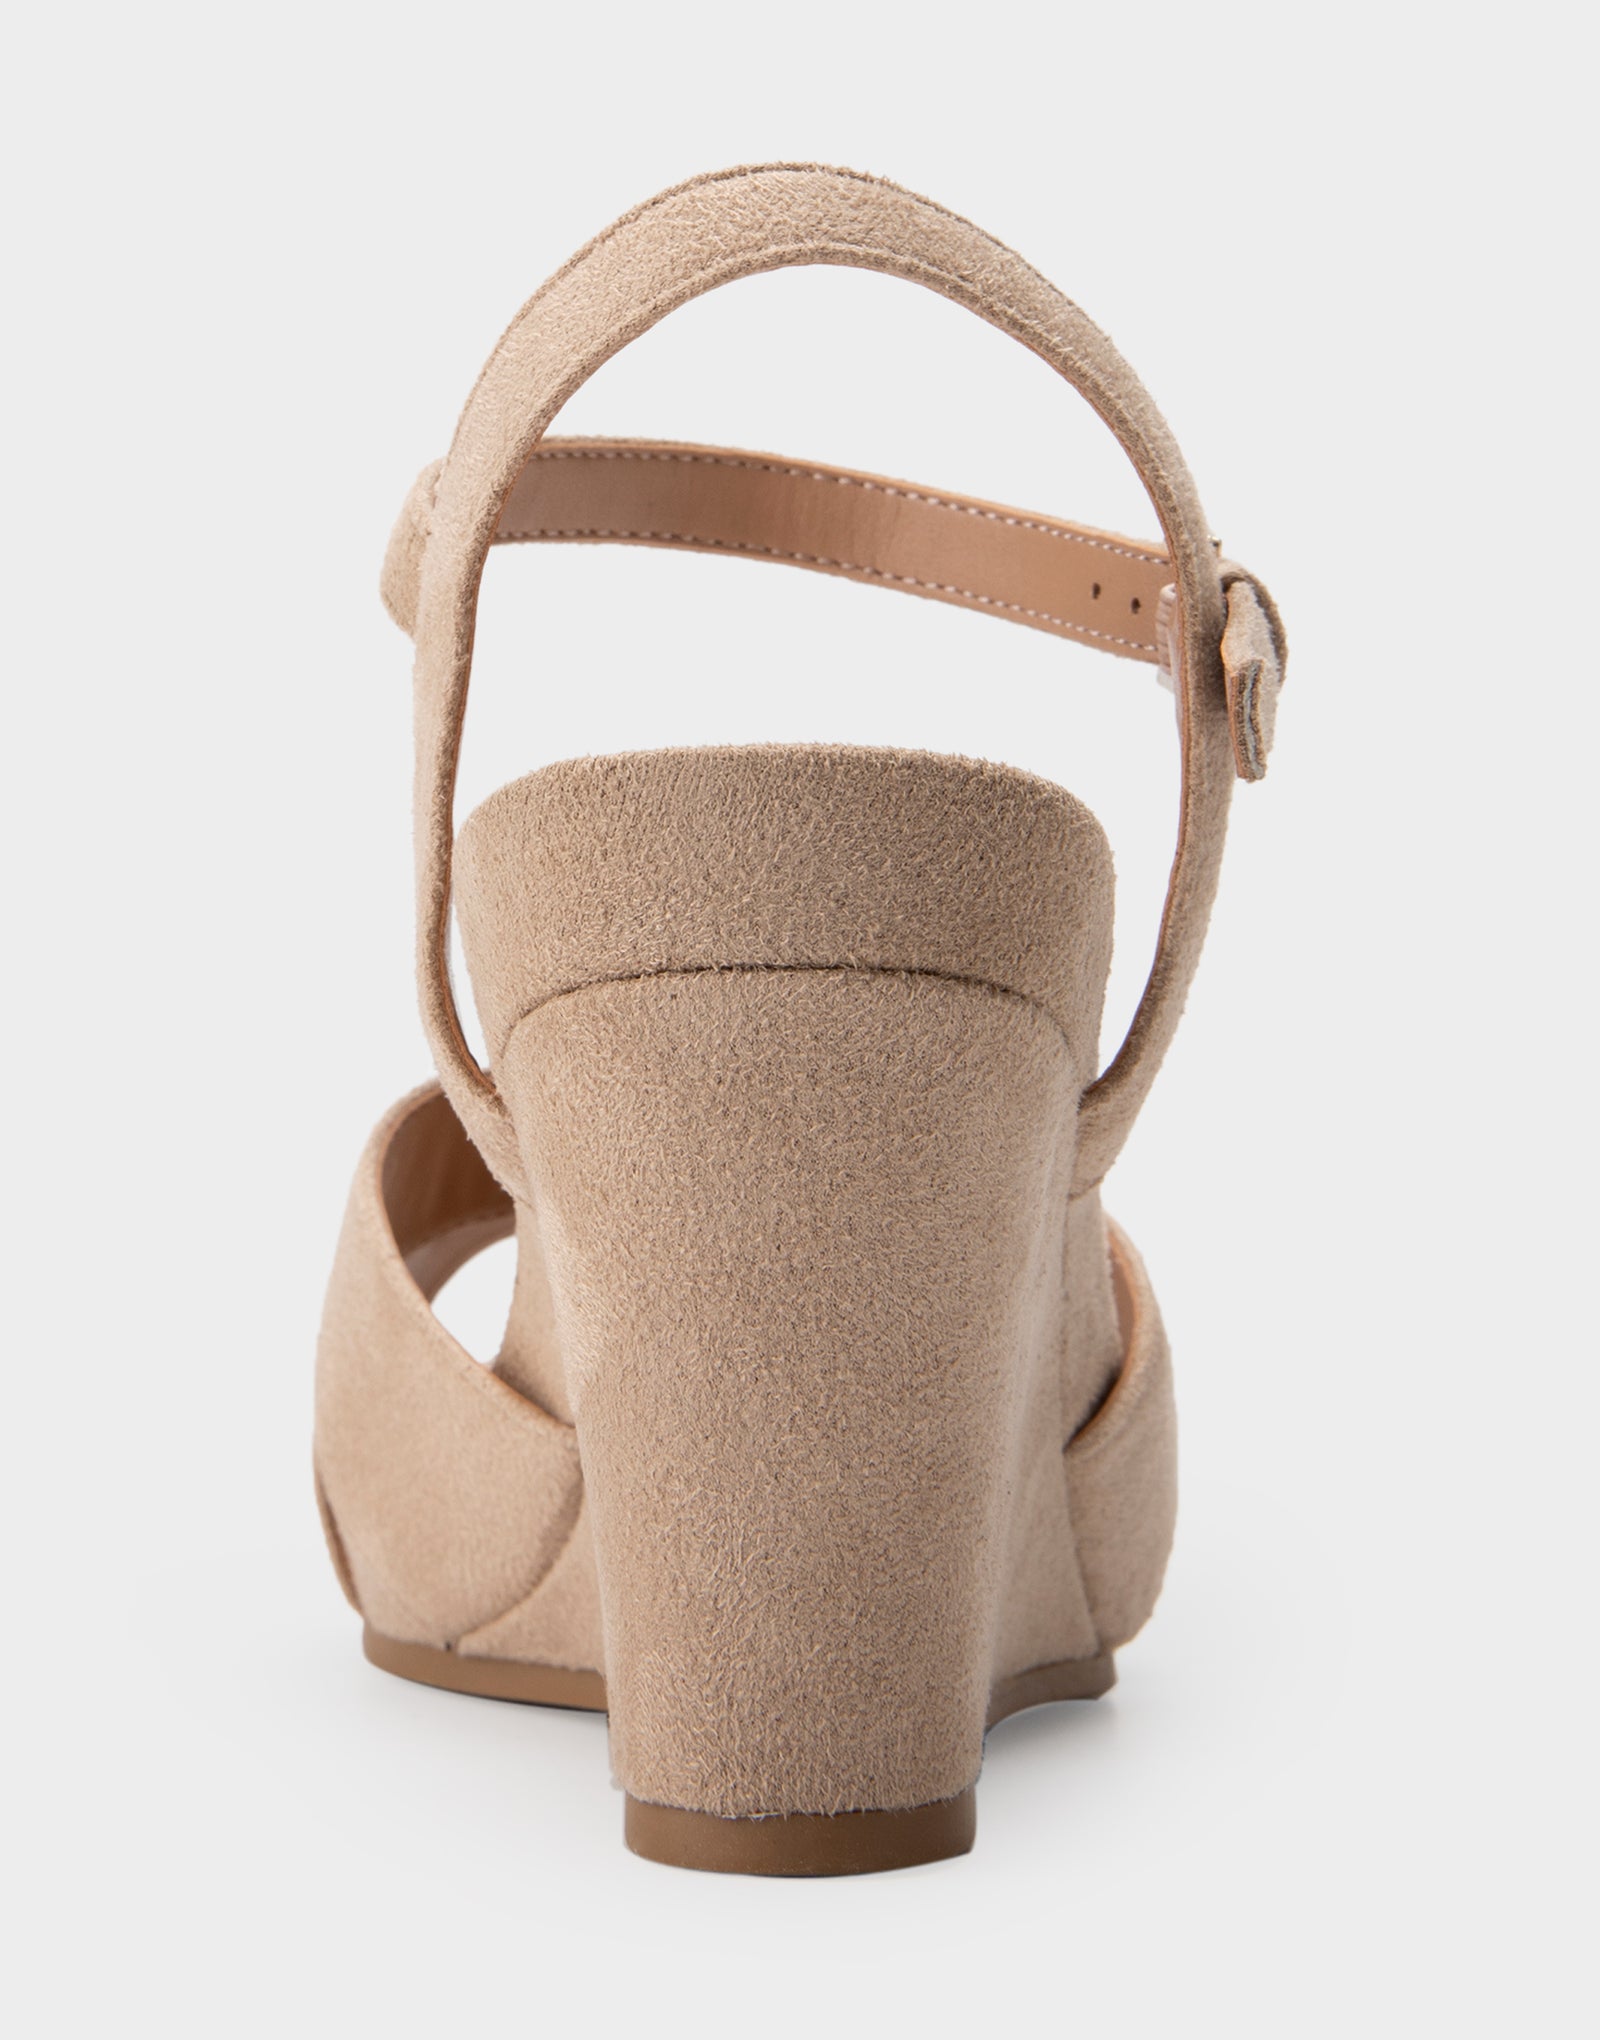 Women's Wedge in Taupe